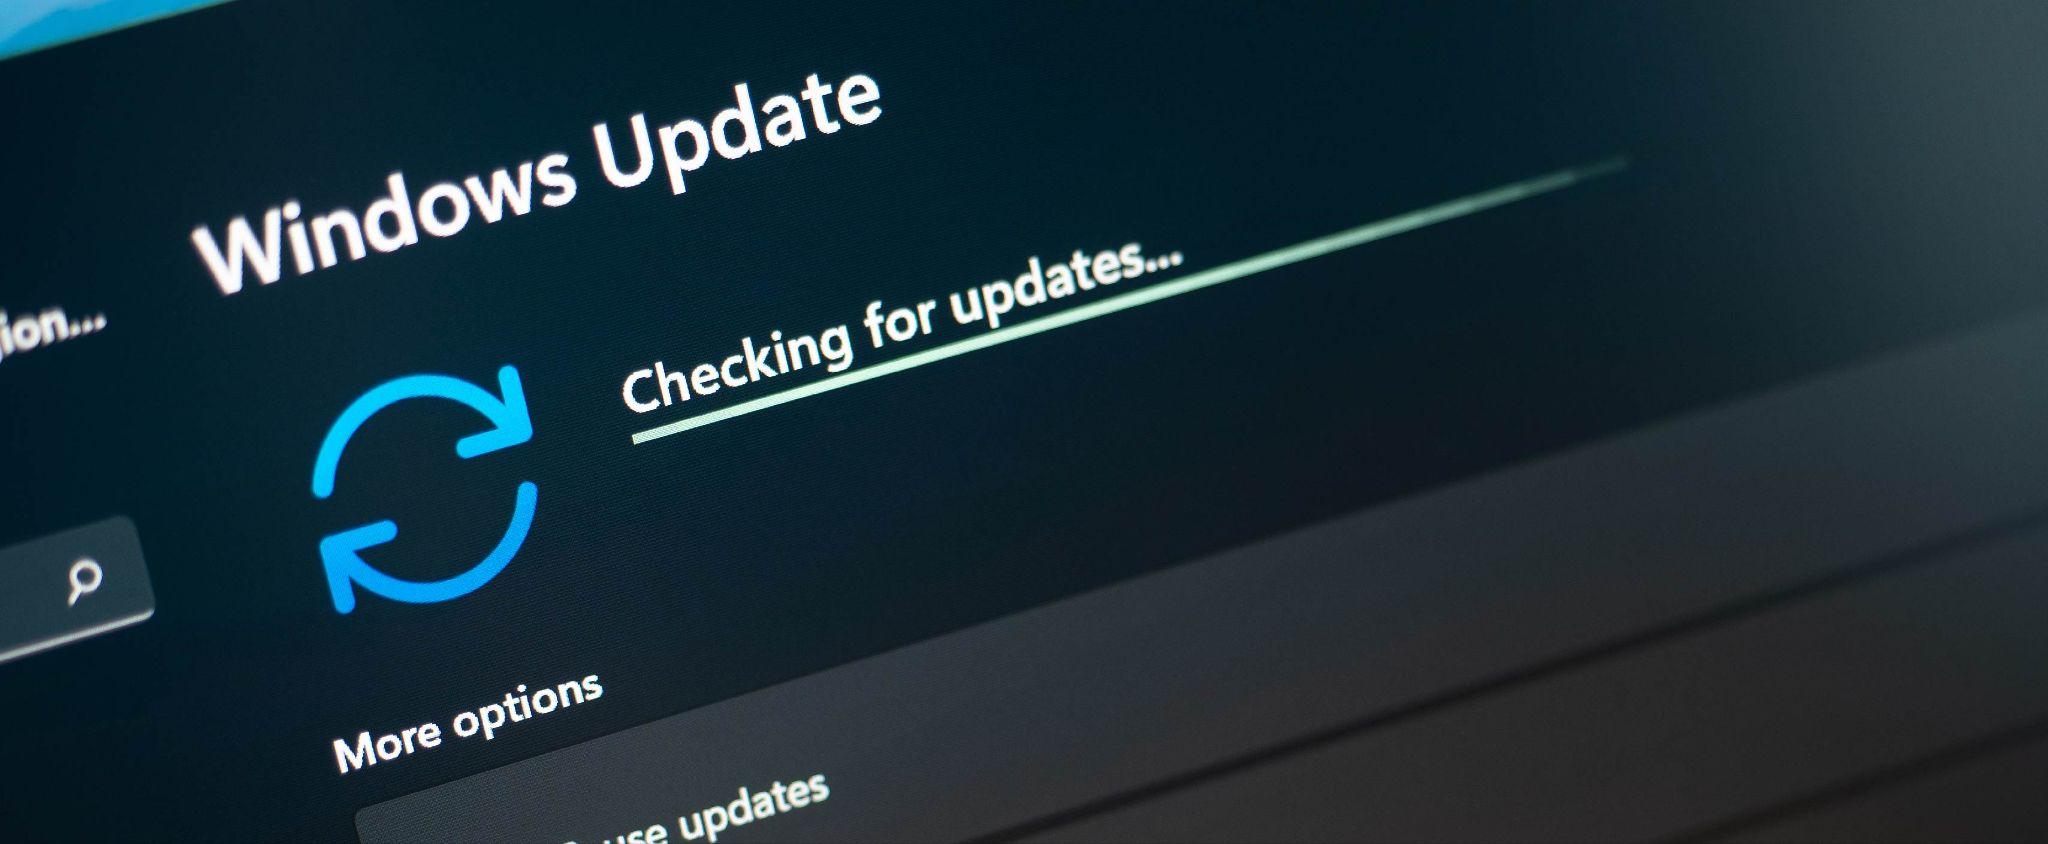 Microsoft Launches On-Premises Unified Update Platform To Control Windows Updates